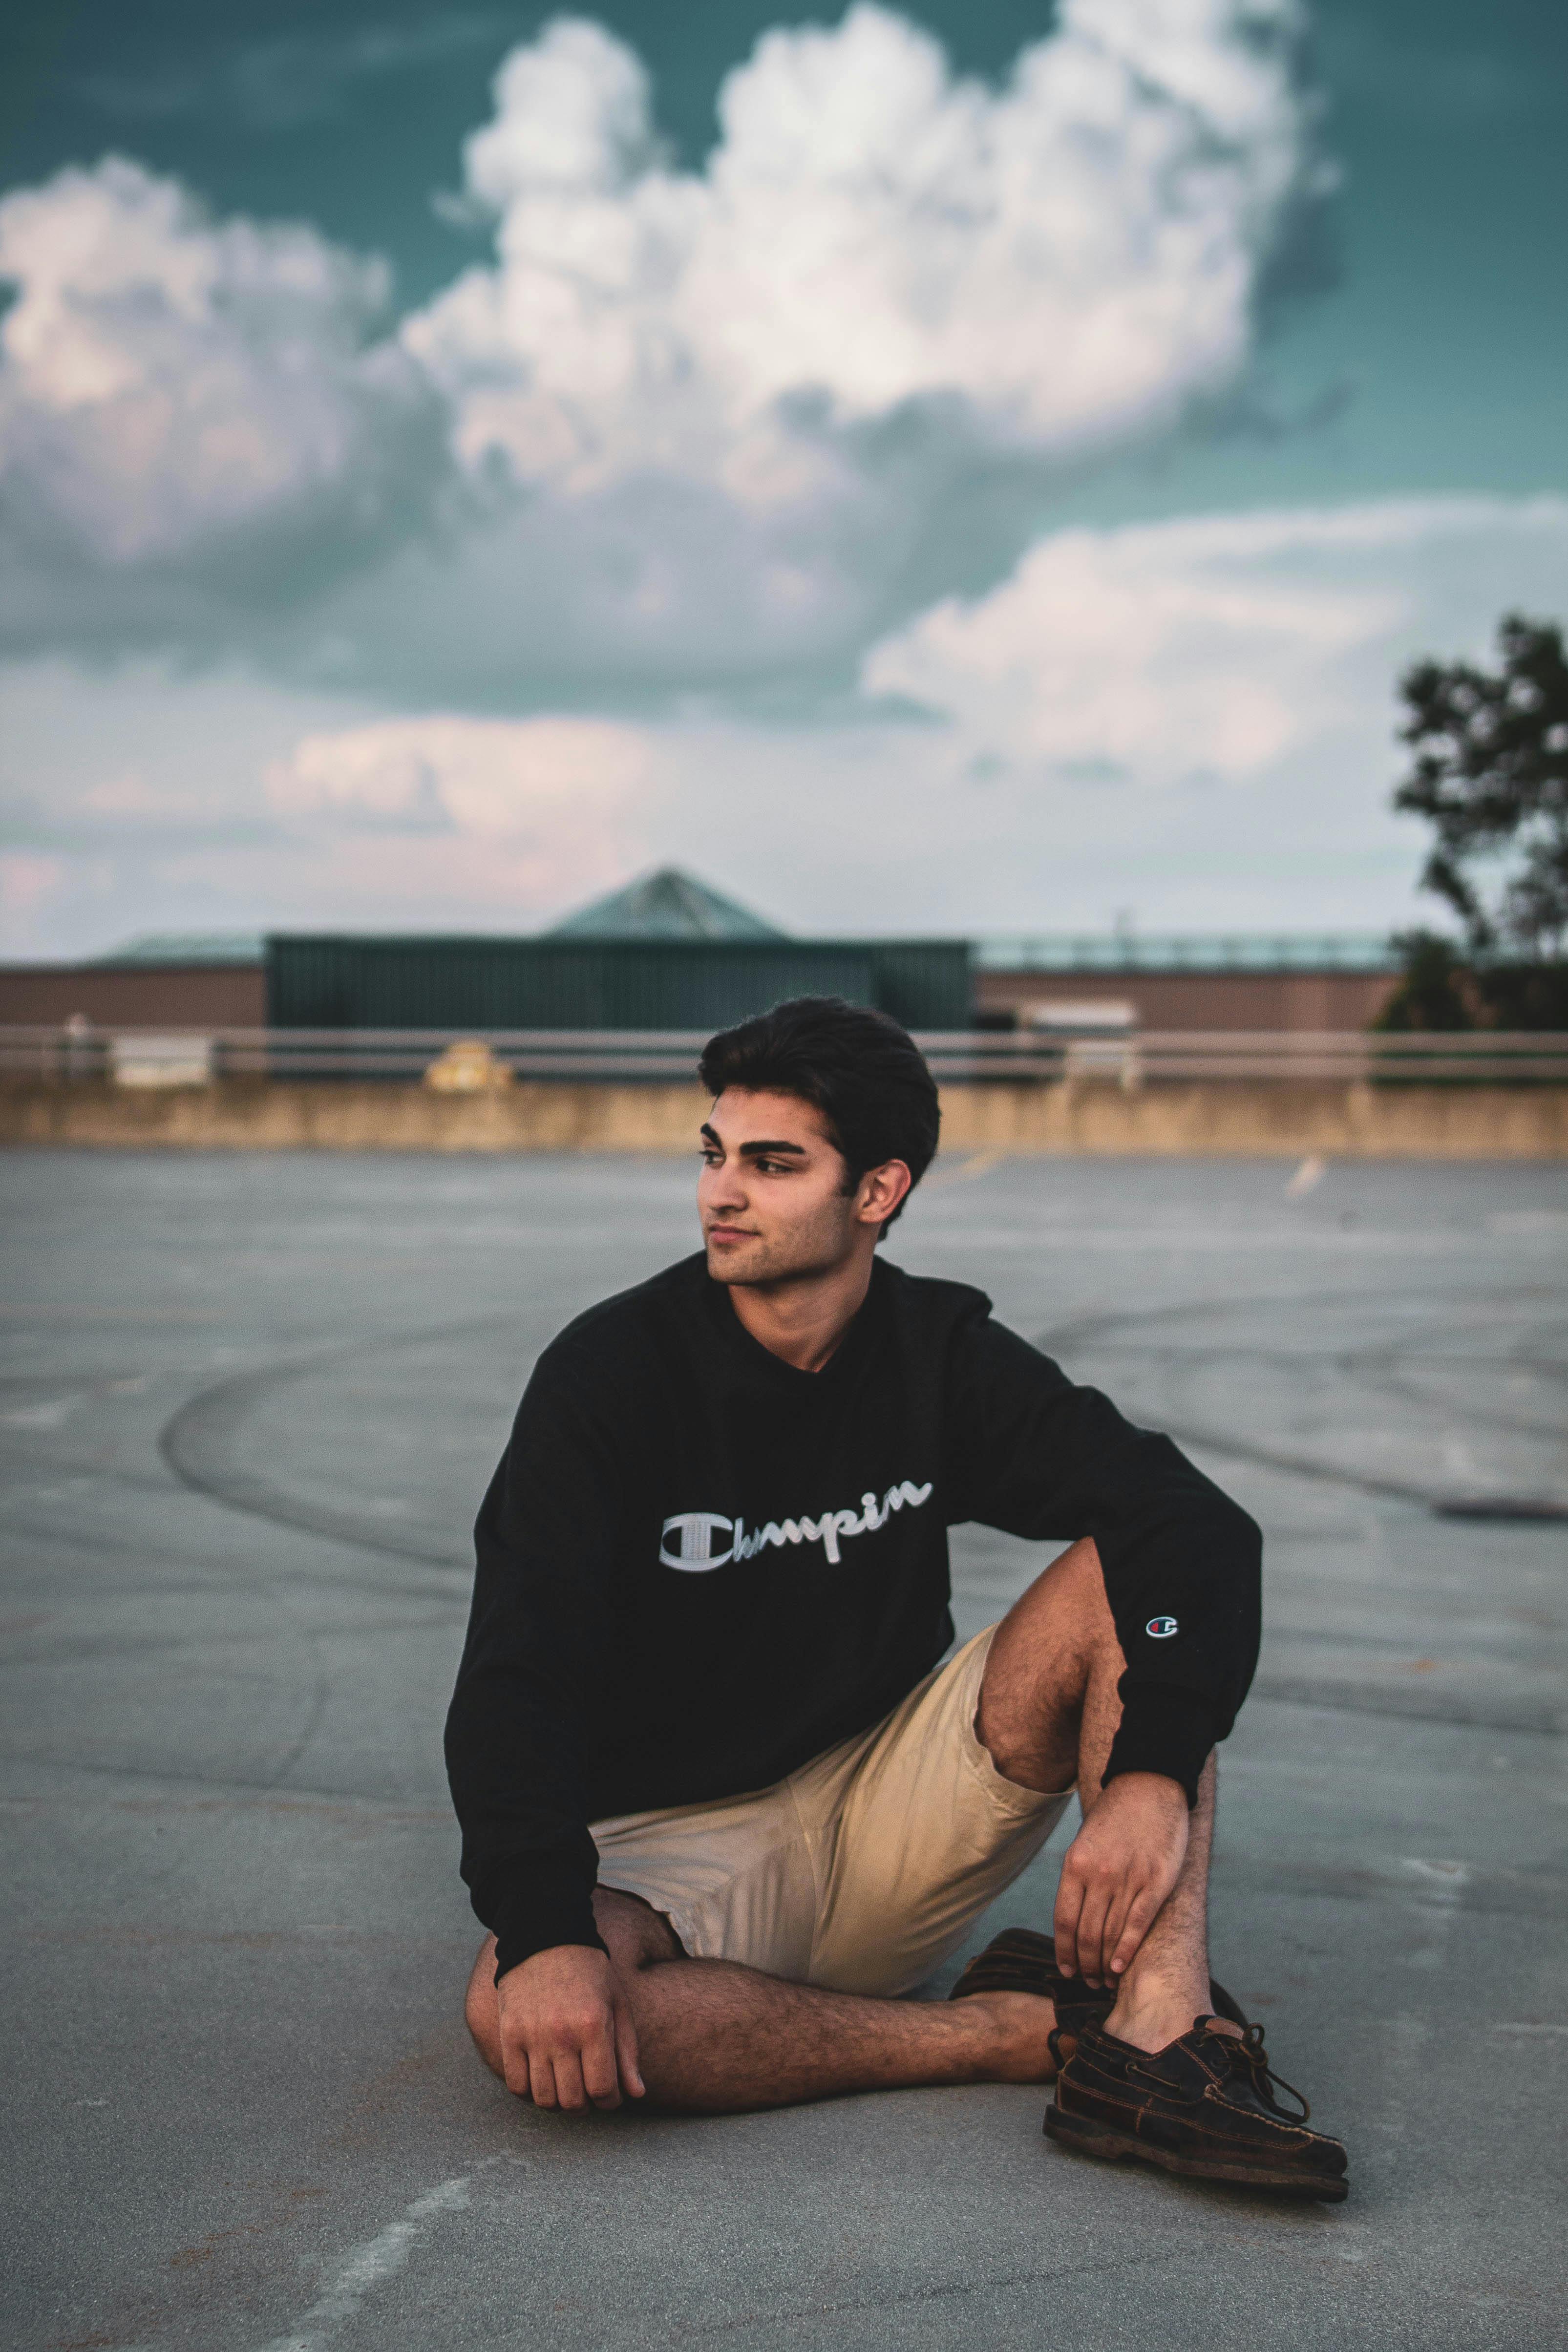 Free stock photo of clouds, model, parking area